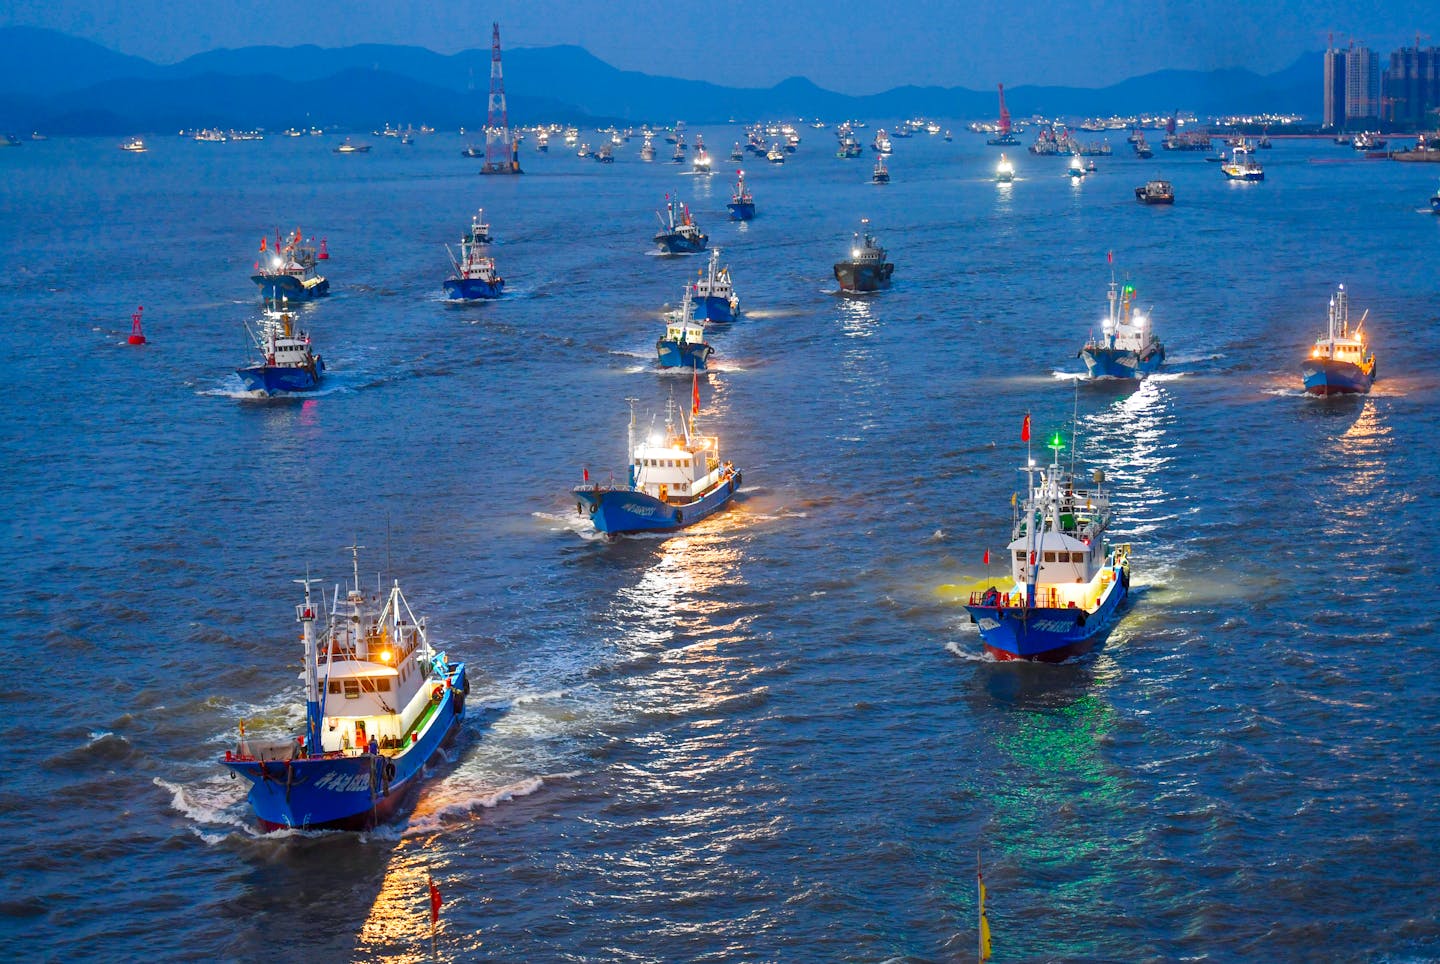 Dozens of fishing boats move out of an urban harbor